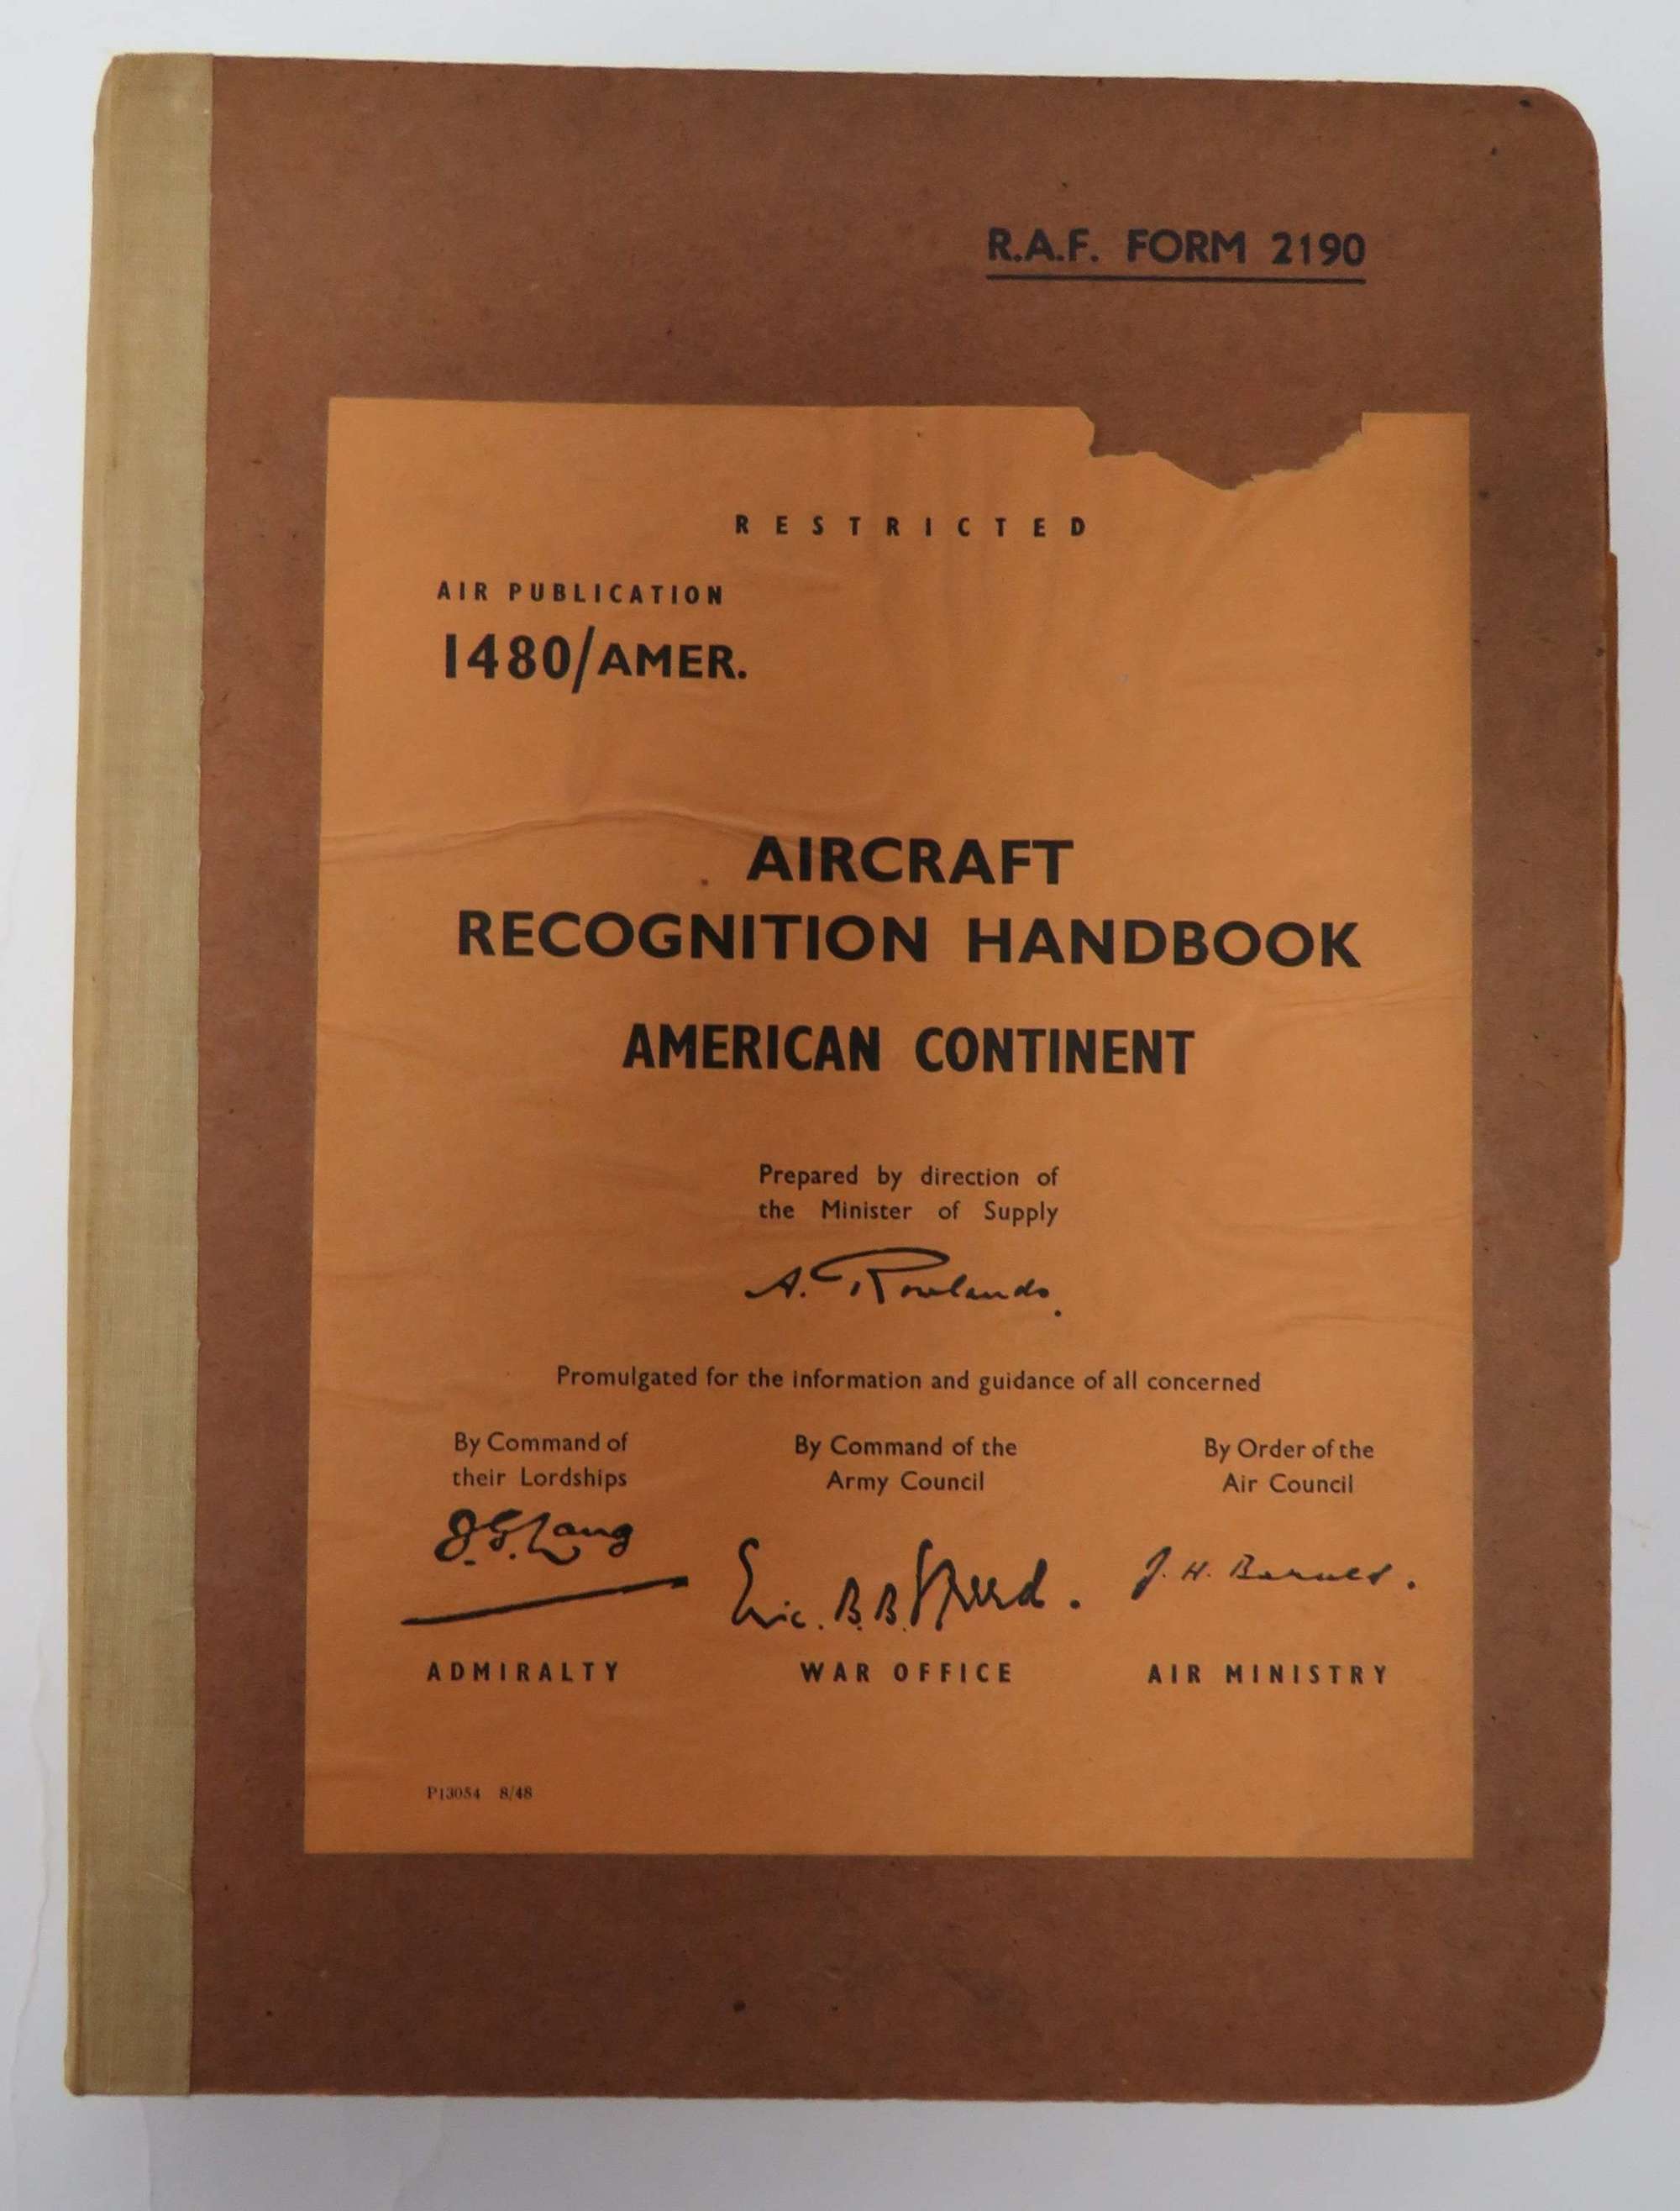 Aircraft Recognition Handbook of the American Continent